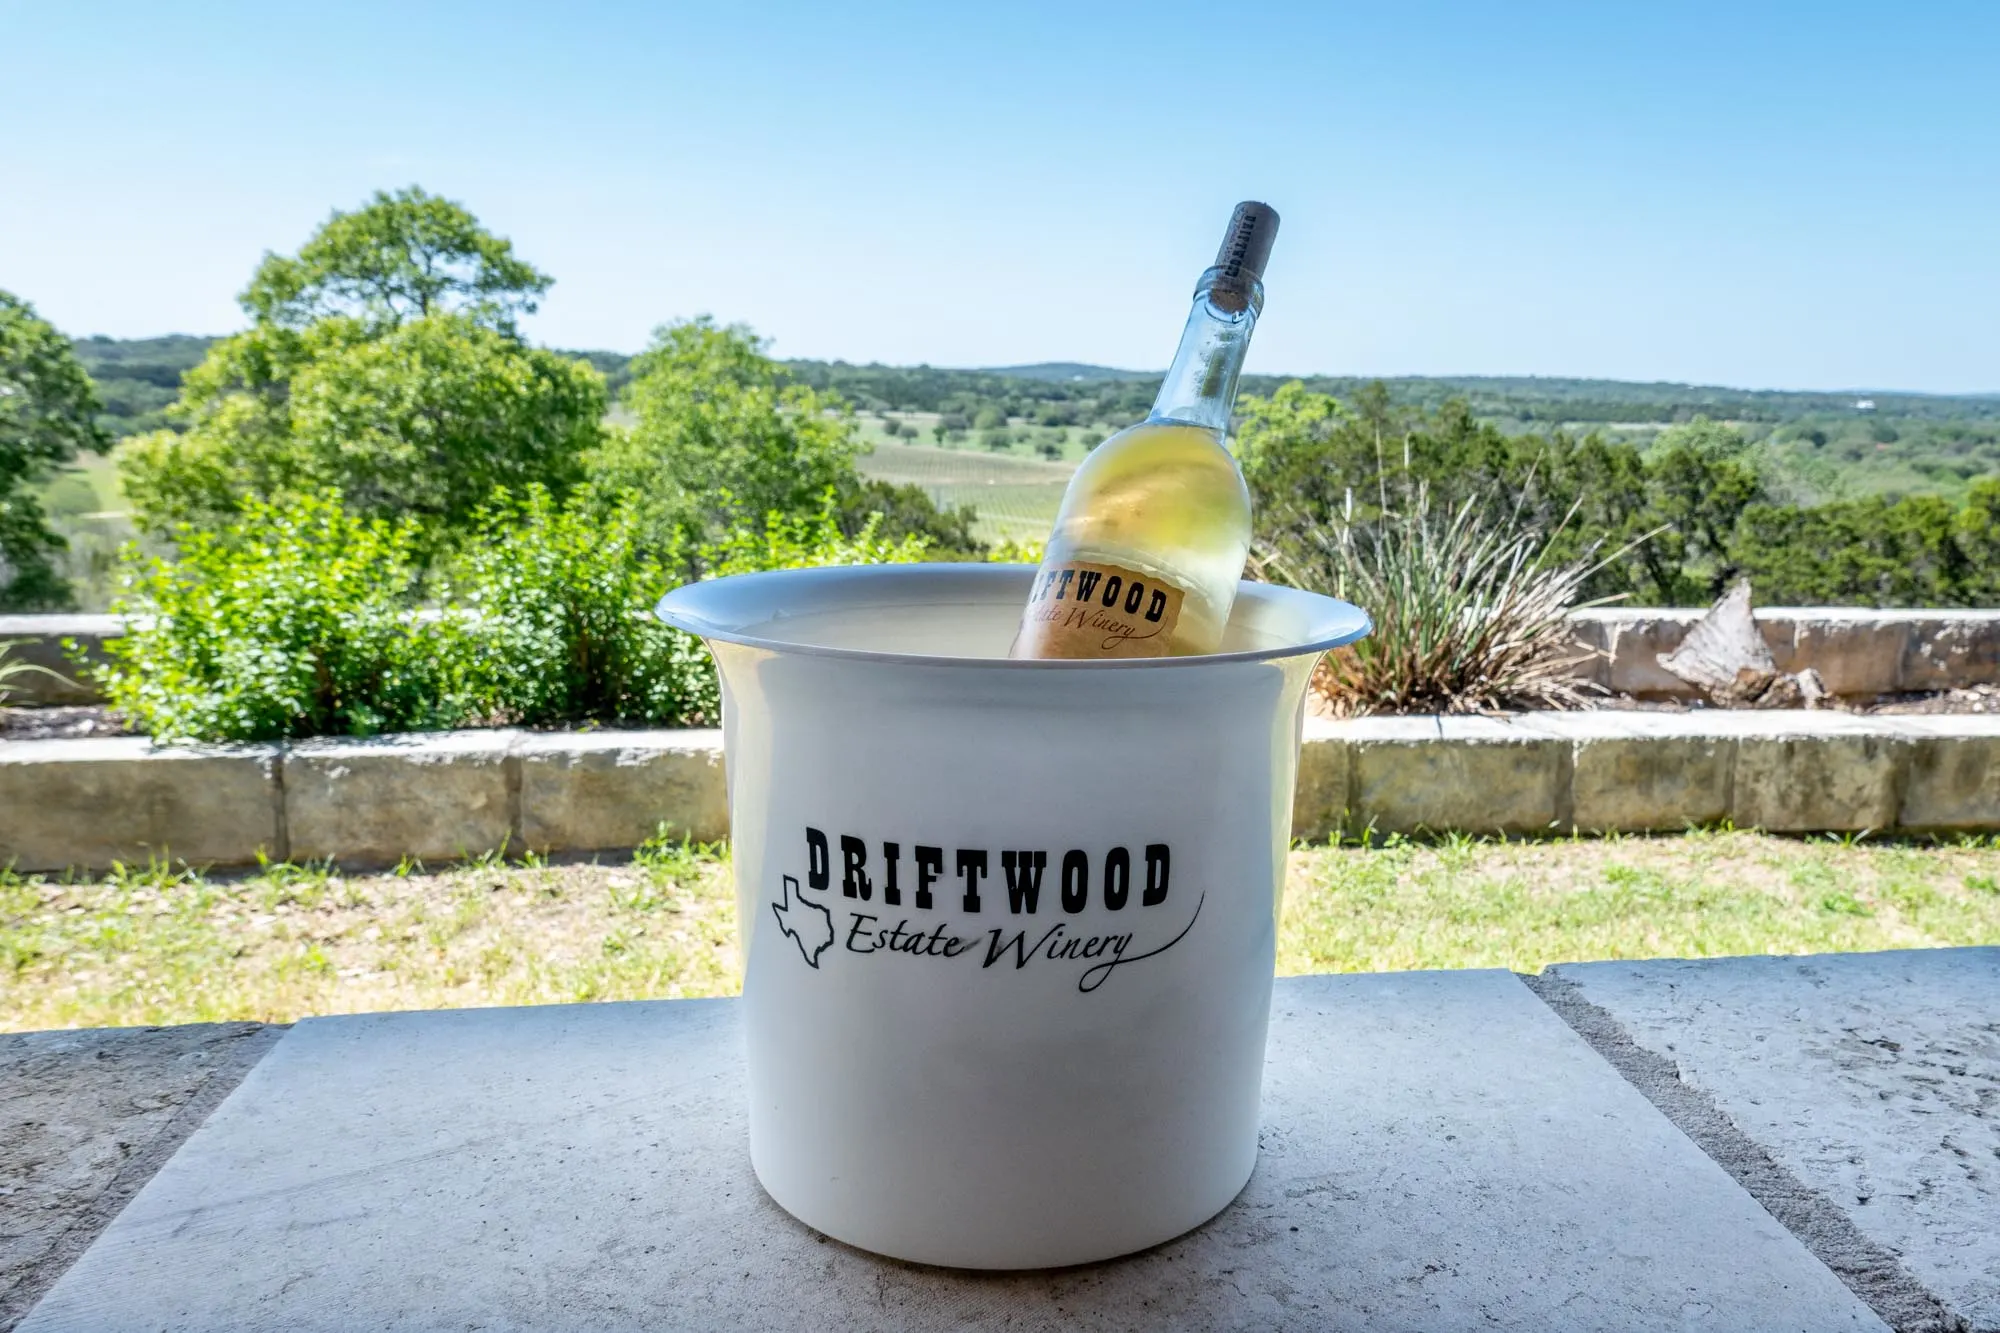 Bottle of white wine in a white ice bucket labeled "Driftwood Estate Winery."